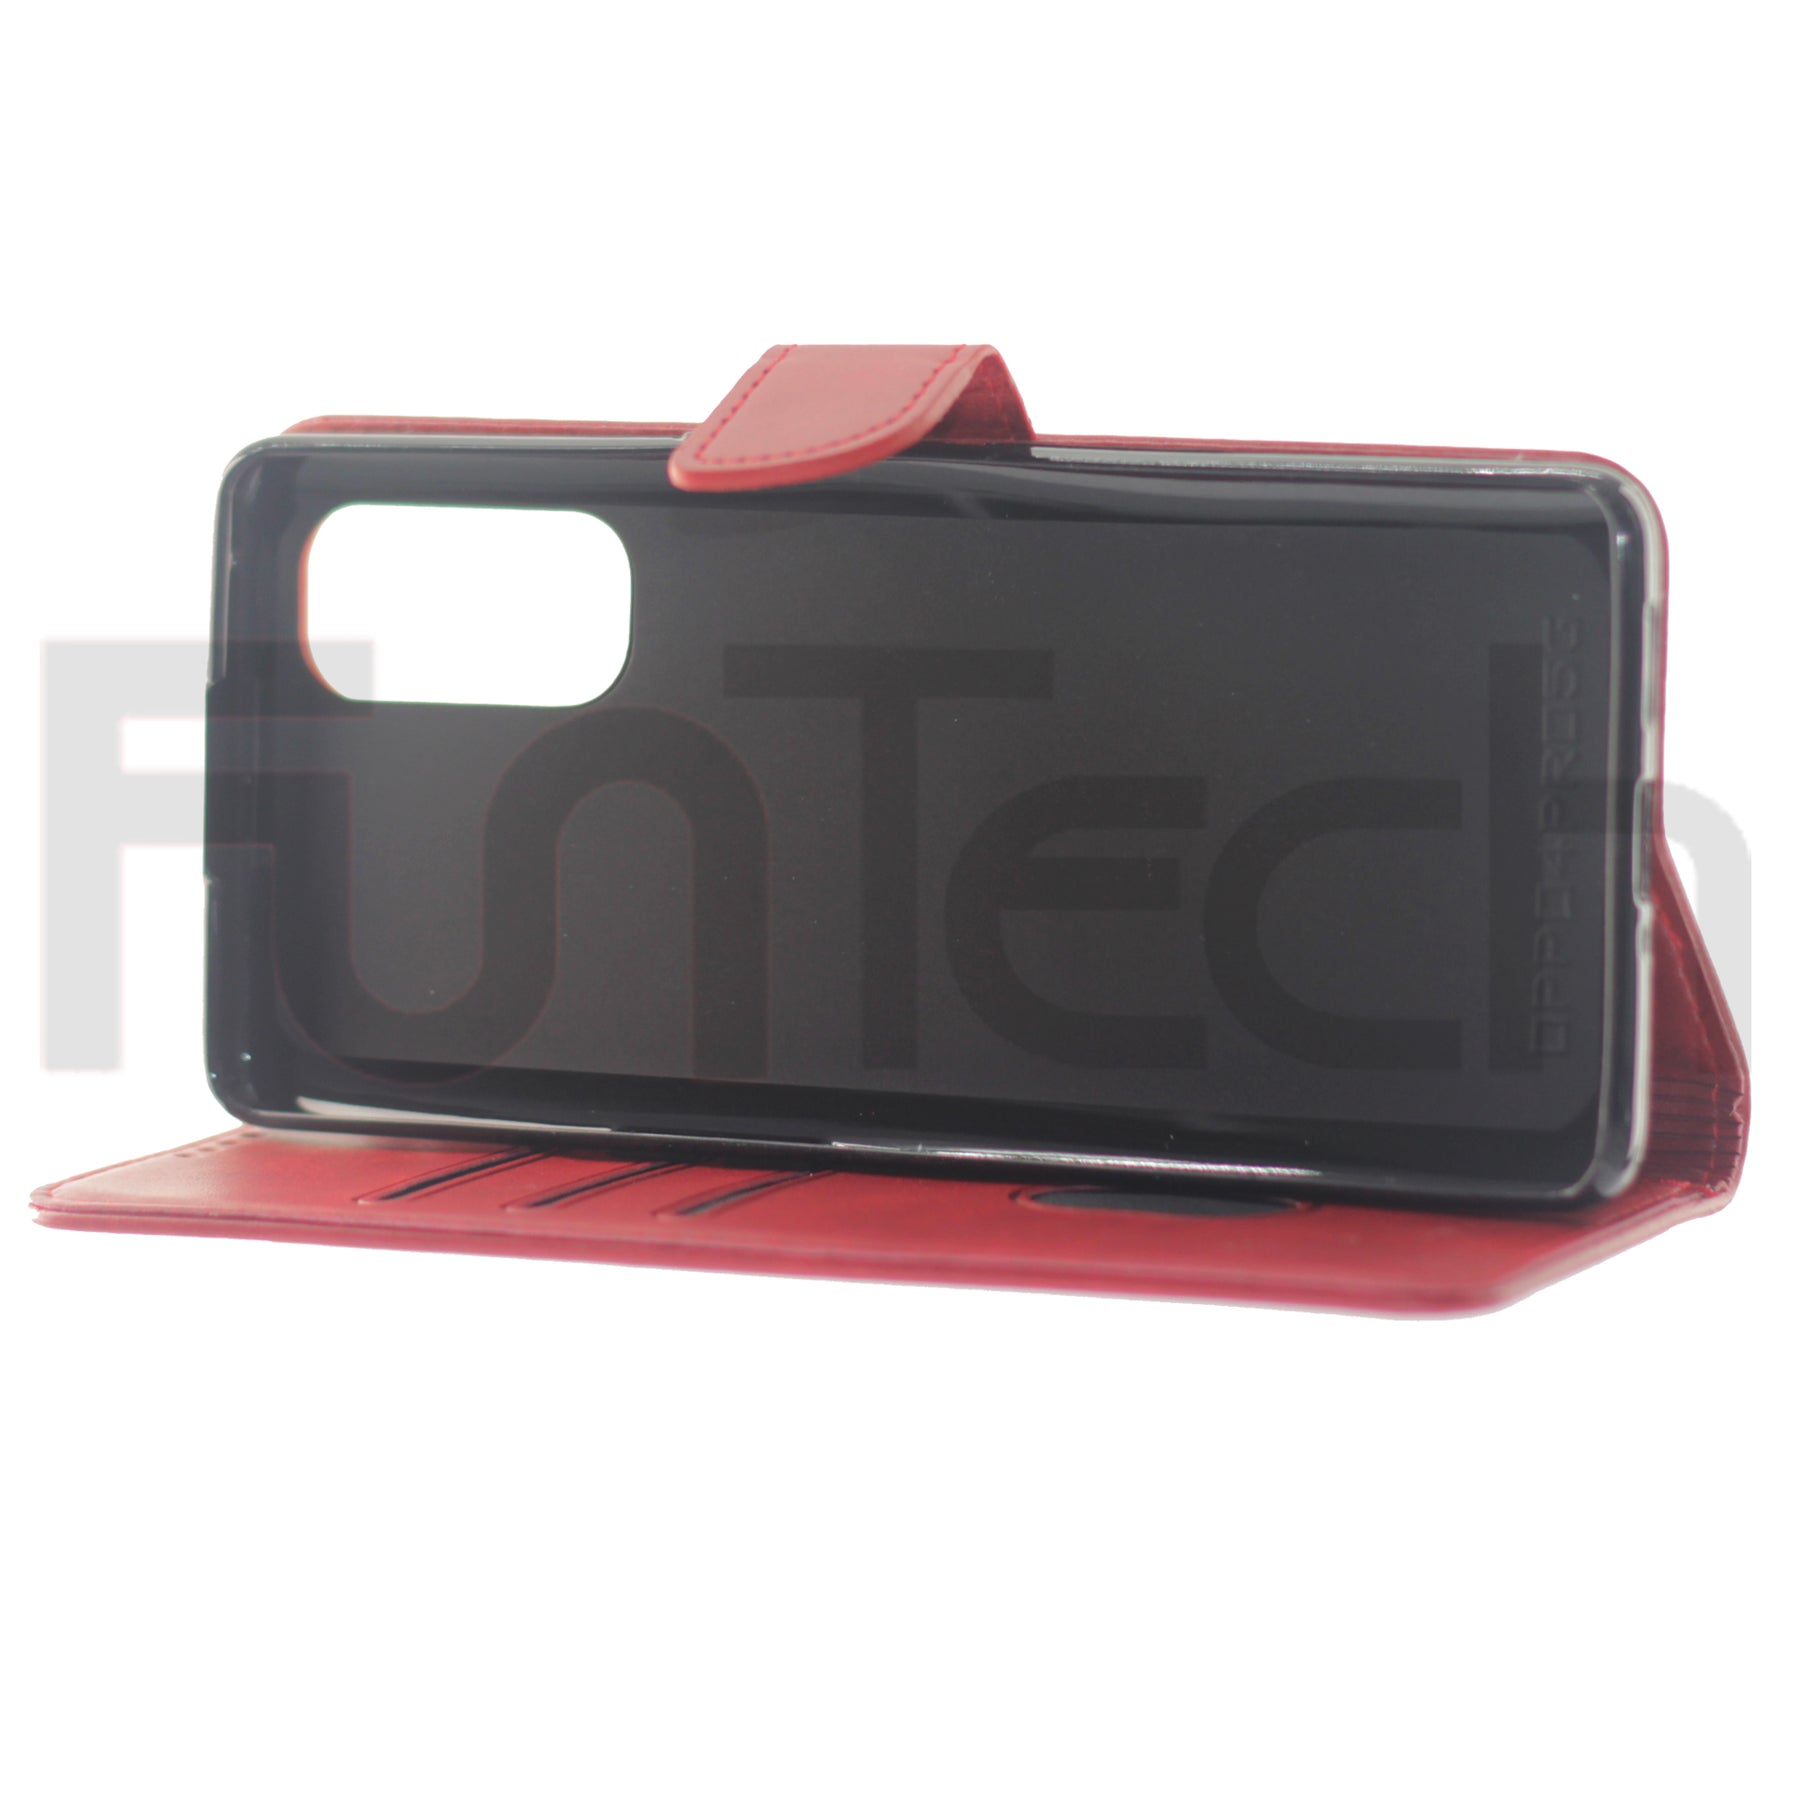 Oppo Reno 4 Pro 5G Lite, Leather Wallet Case, Color Red.